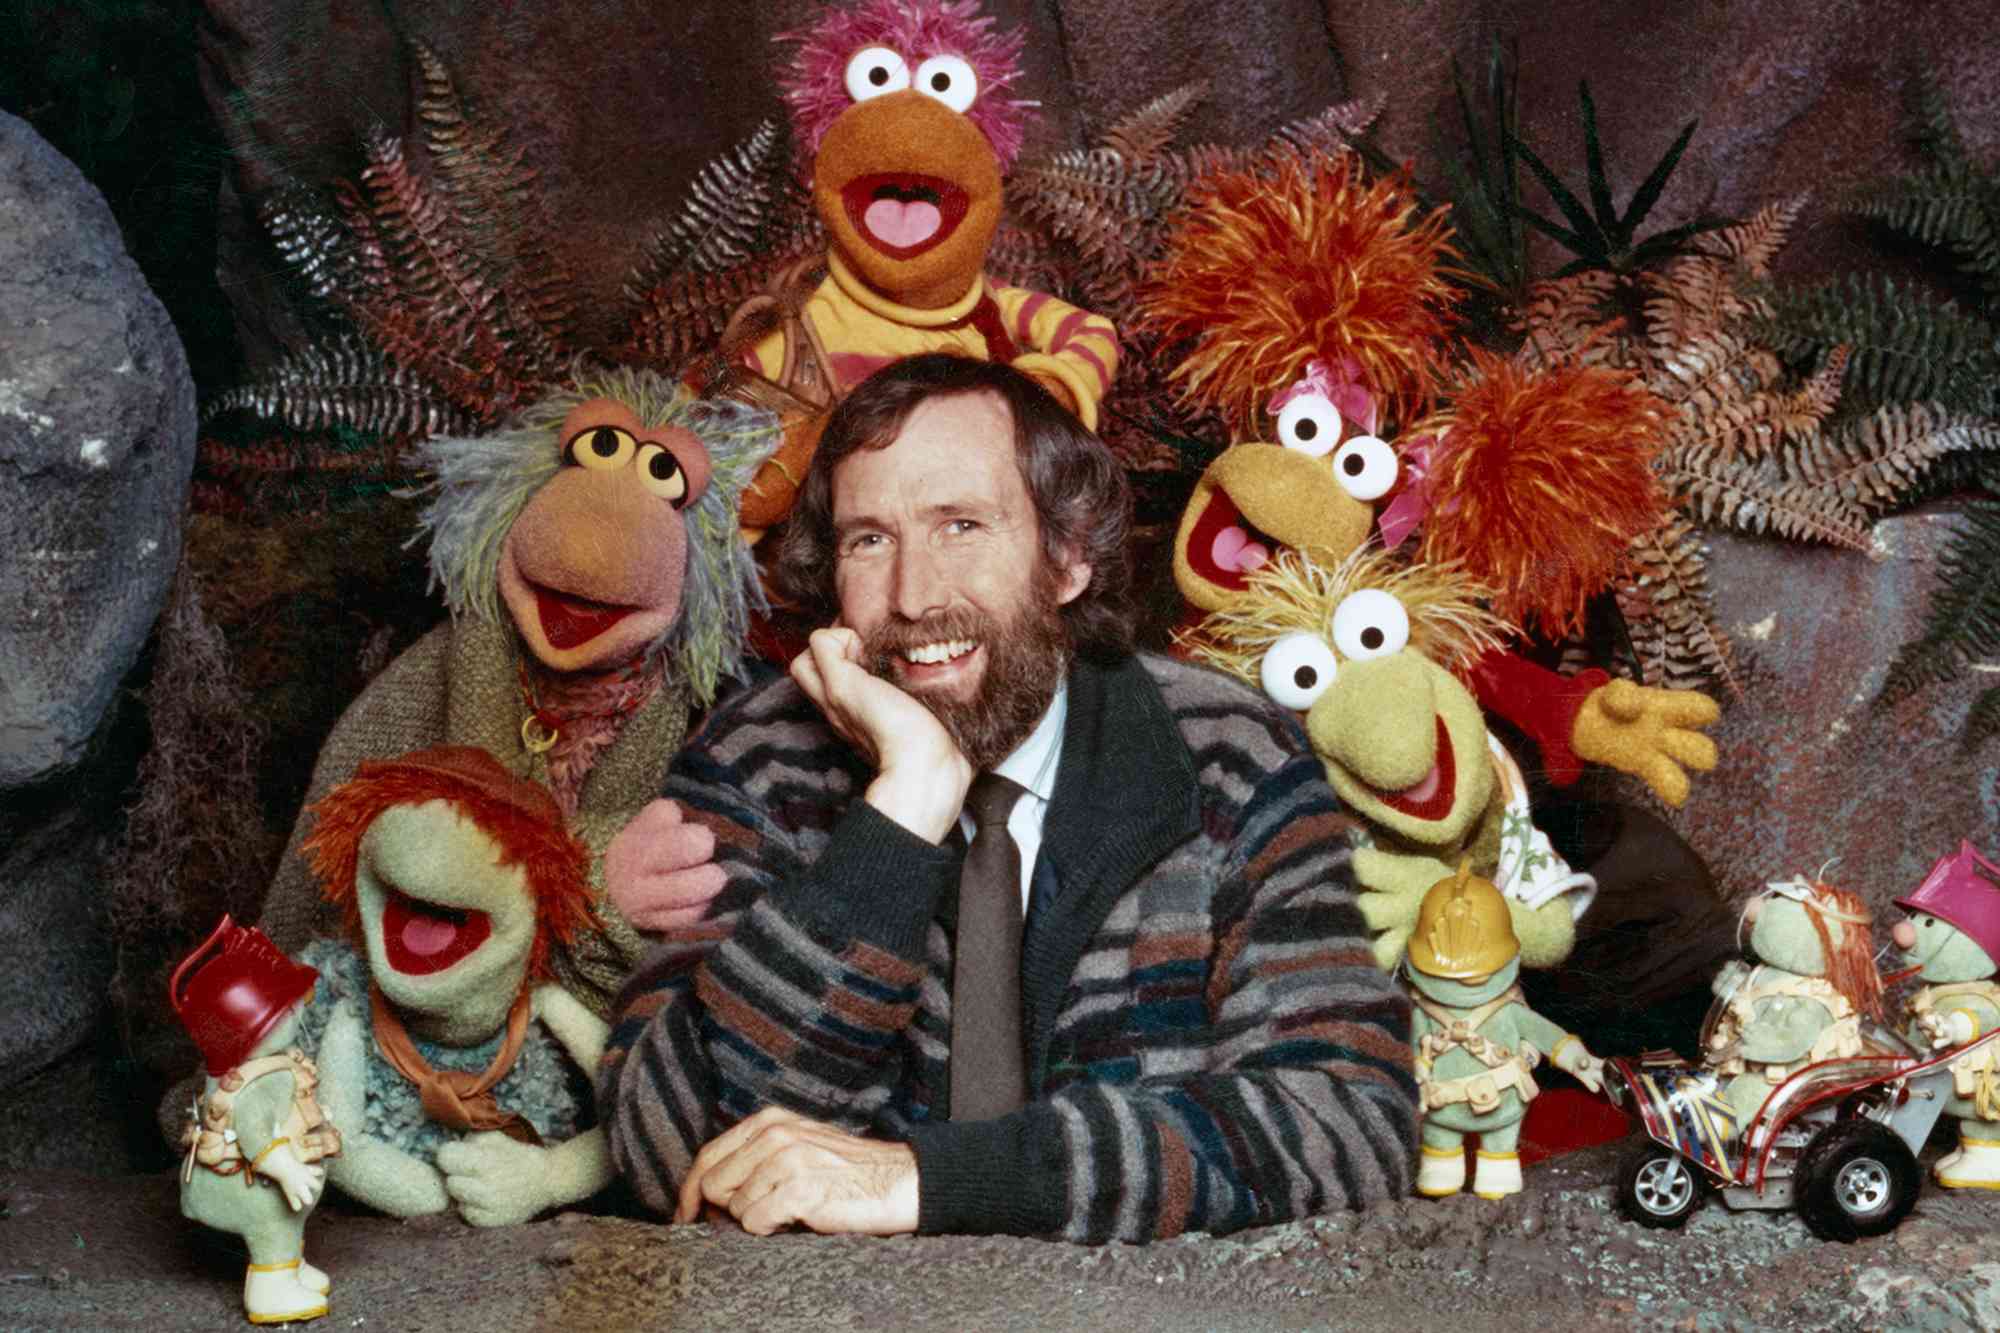 How Did Jim Henson Die? The Tragic Story Leading Up to the Muppets Creator's Death